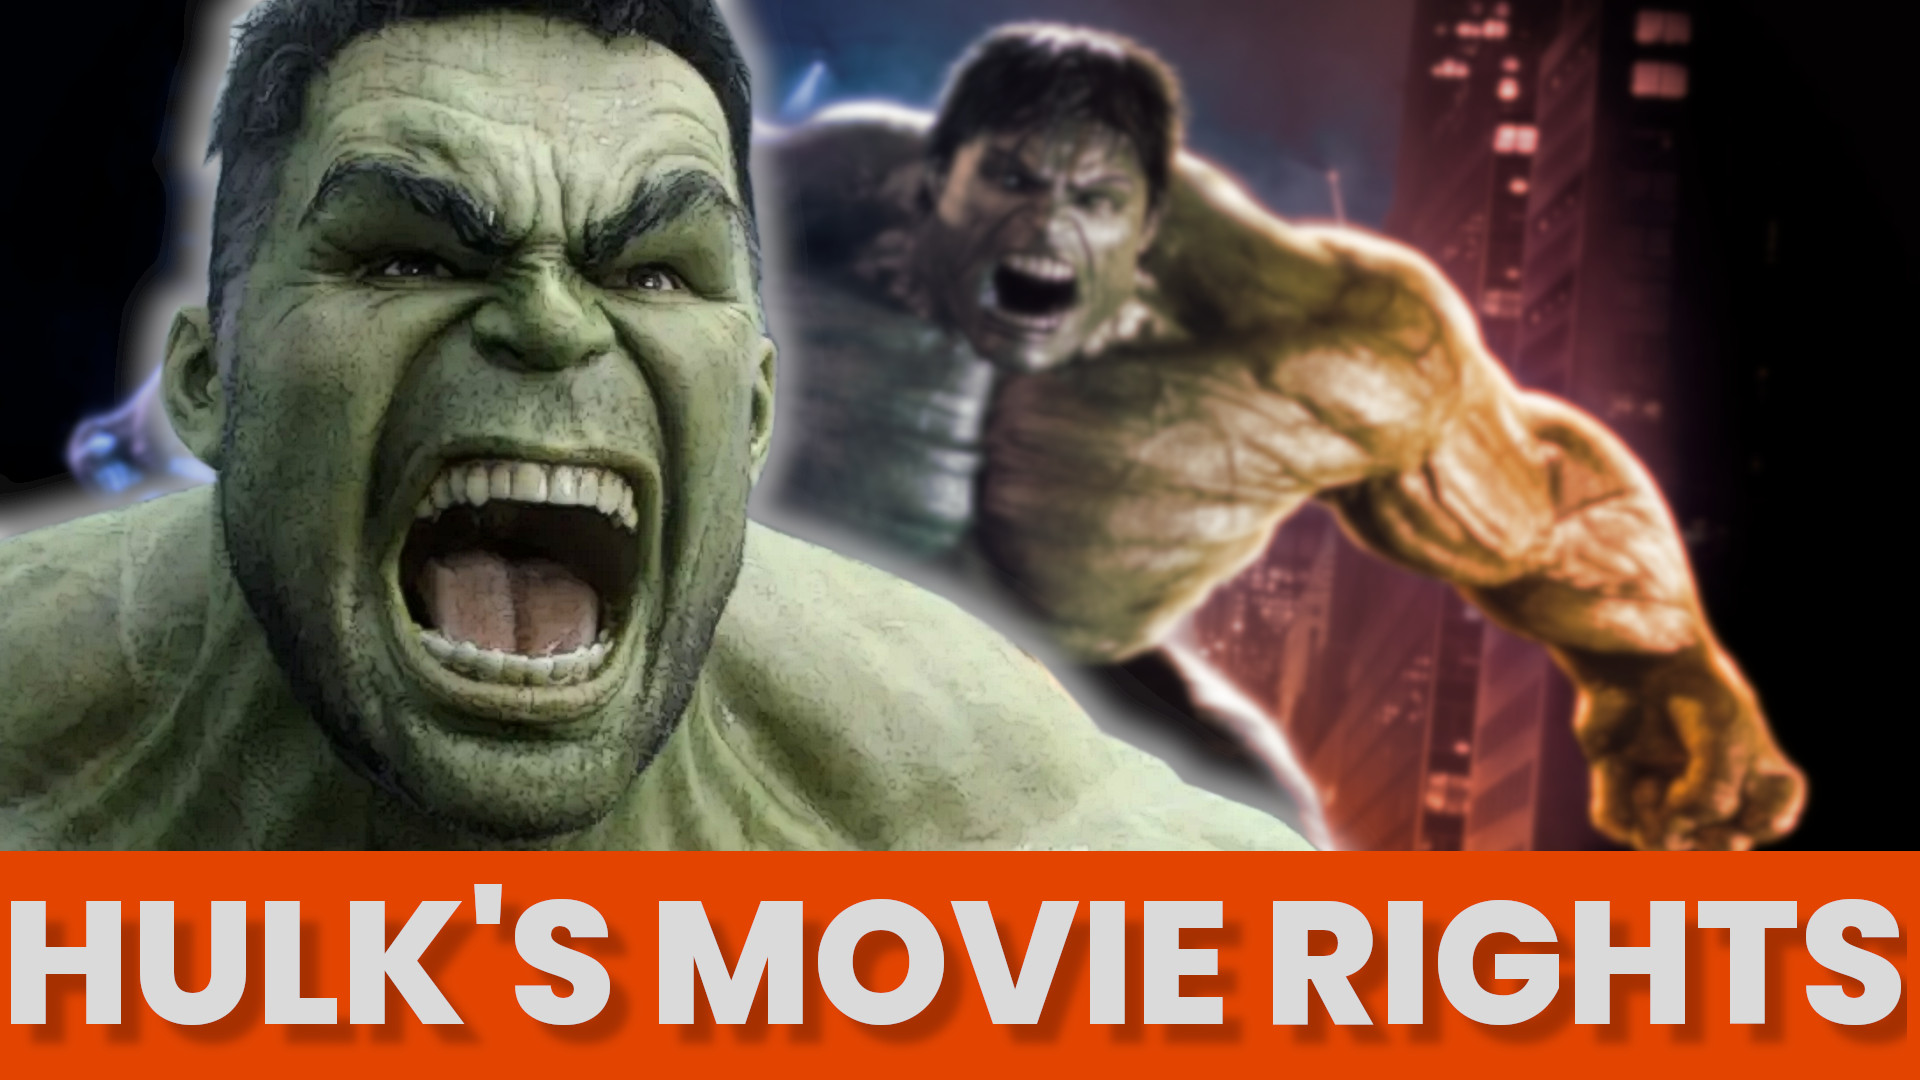 Evidence Shows Hulk's Movie Rights Could Return To Marvel In 2023